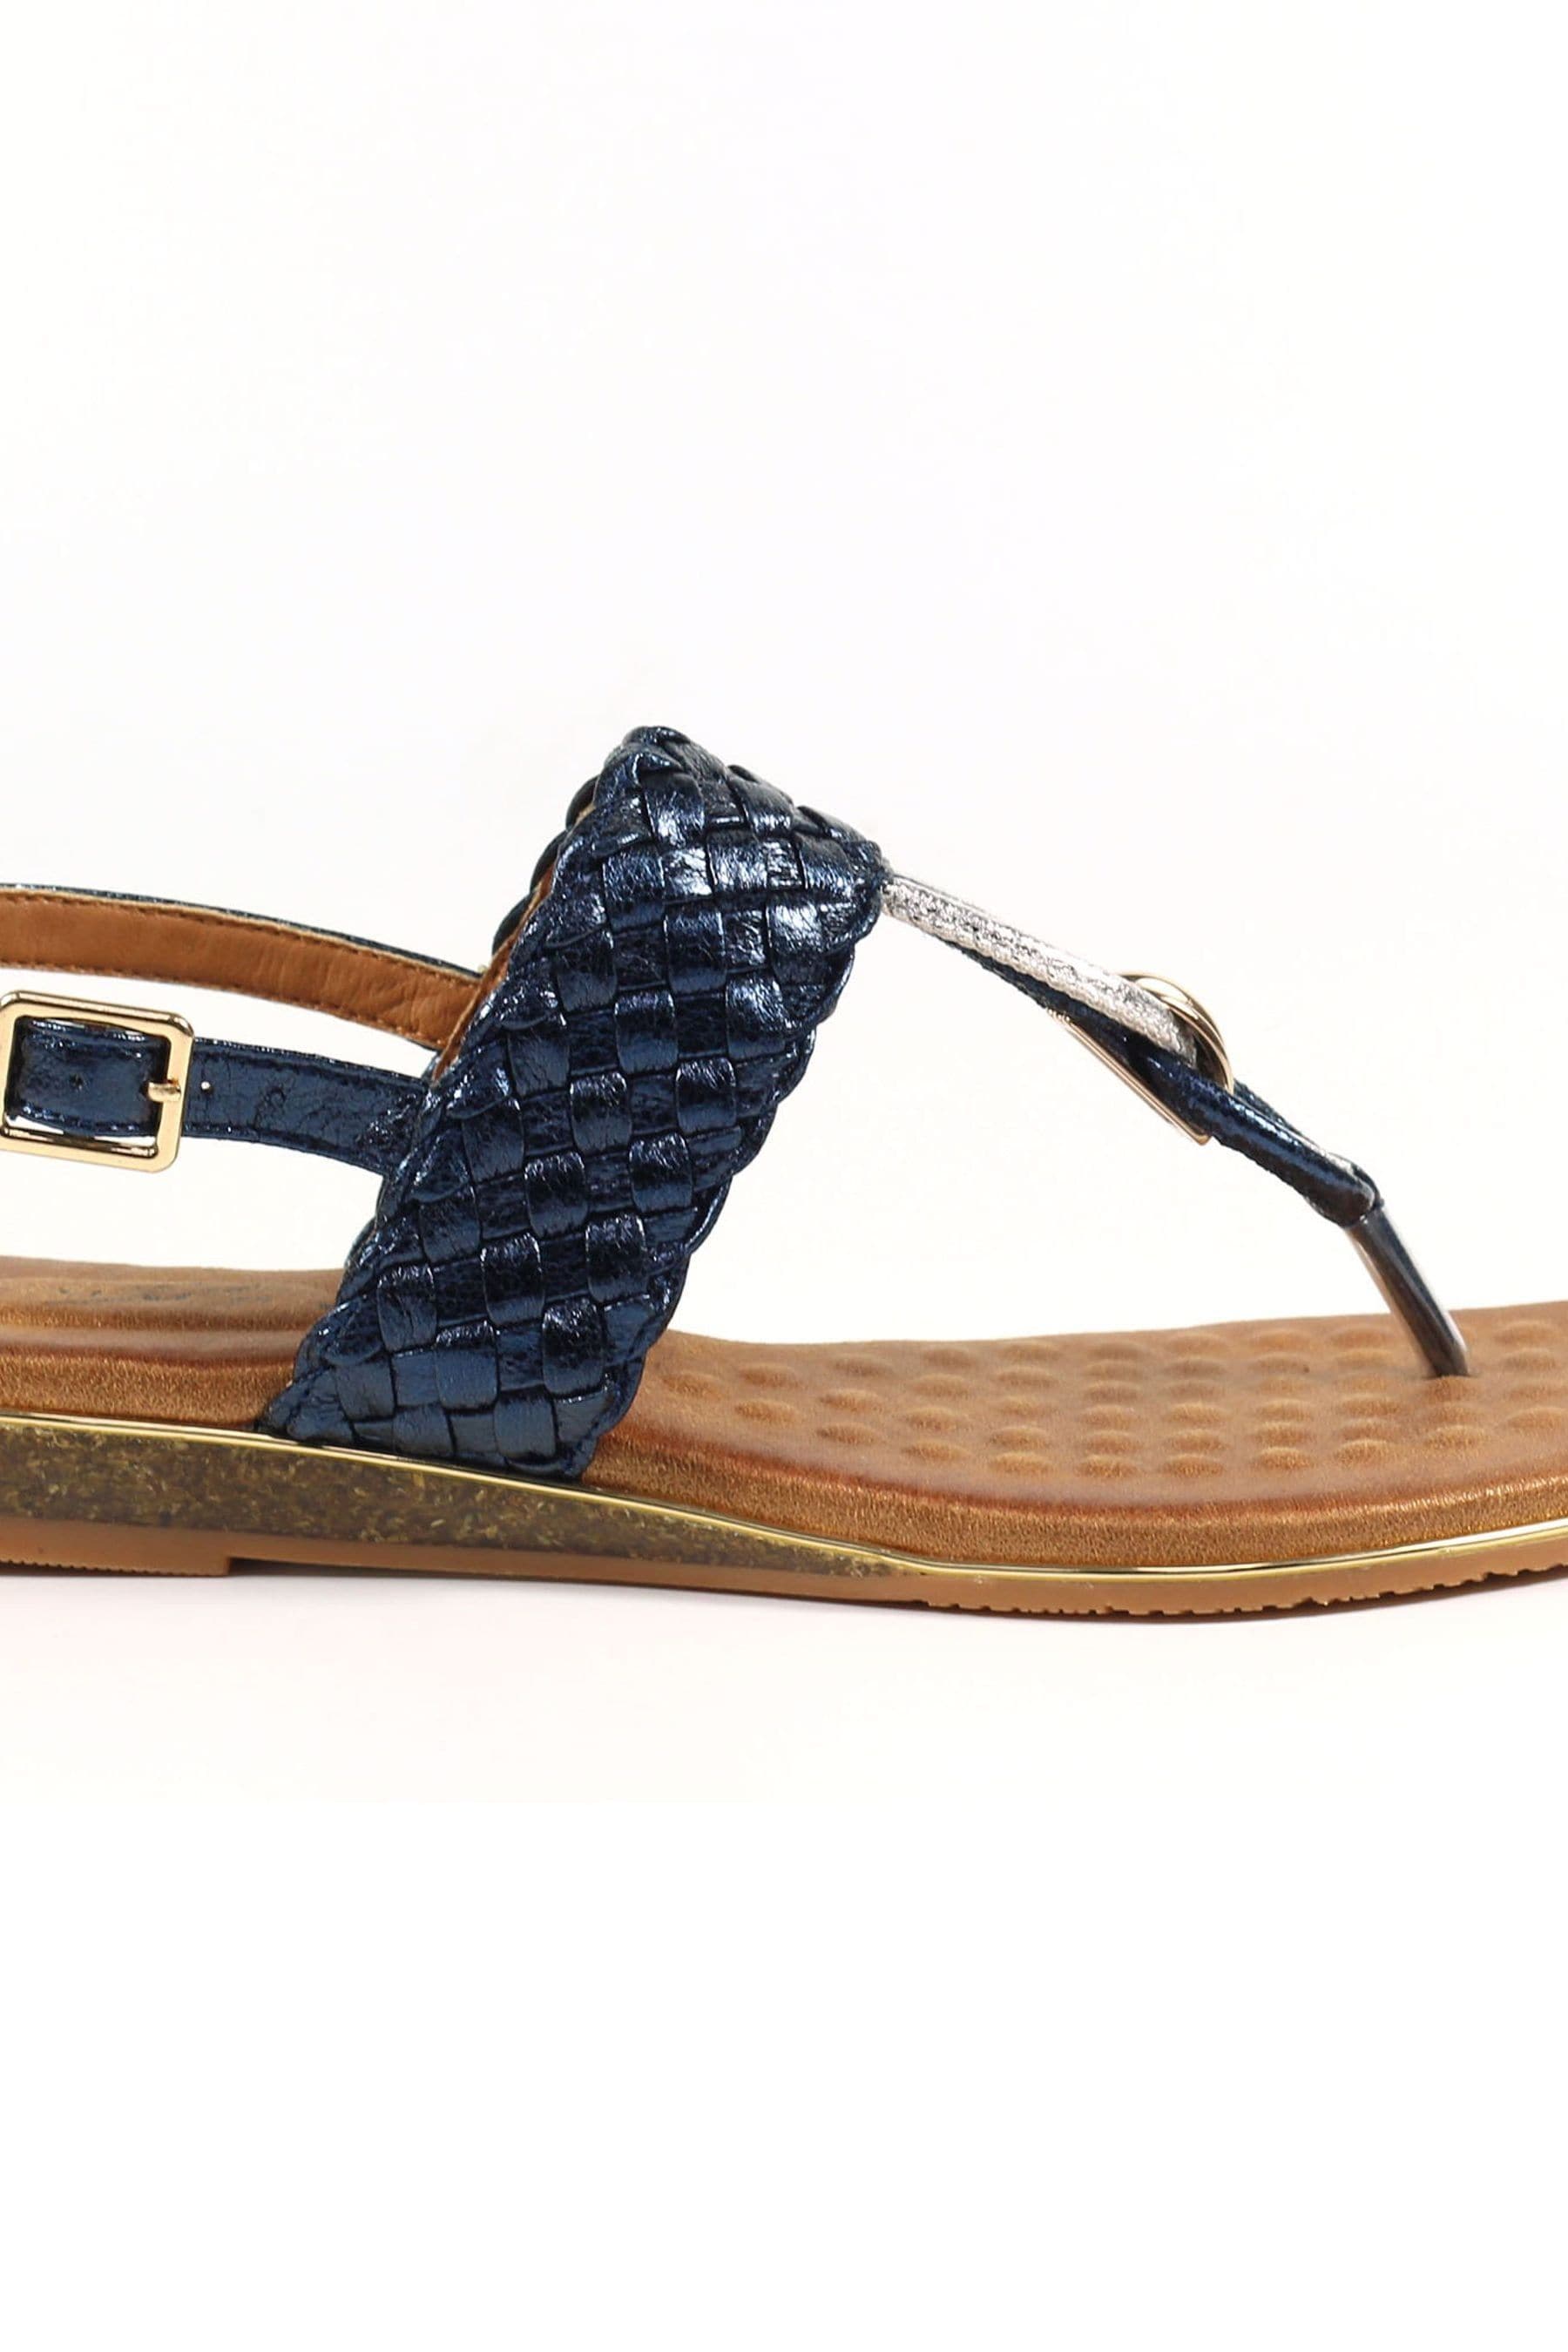 Buy Lunar Dawley Sandals from the Next UK online shop